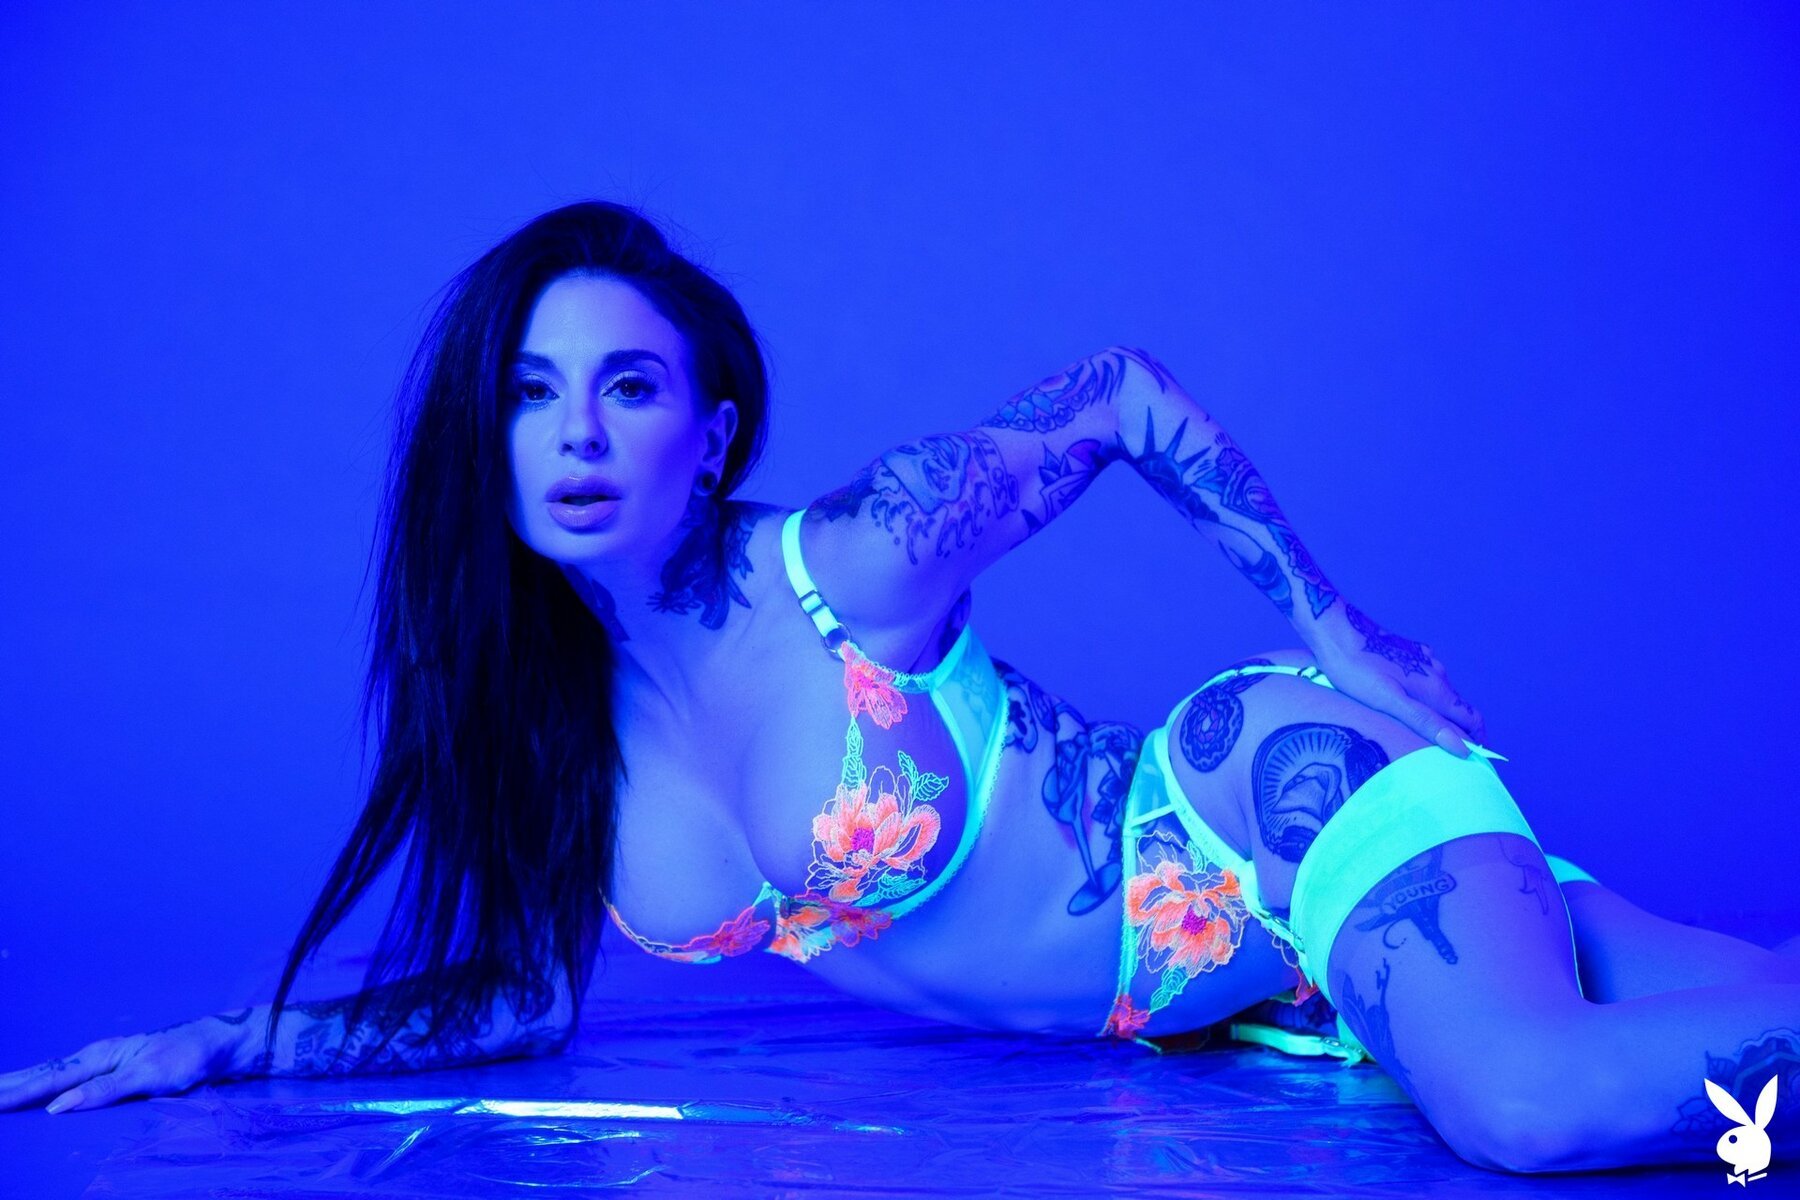 Heavily tattooed Joanna Angel participates in a sexy ultra violet photoshoot